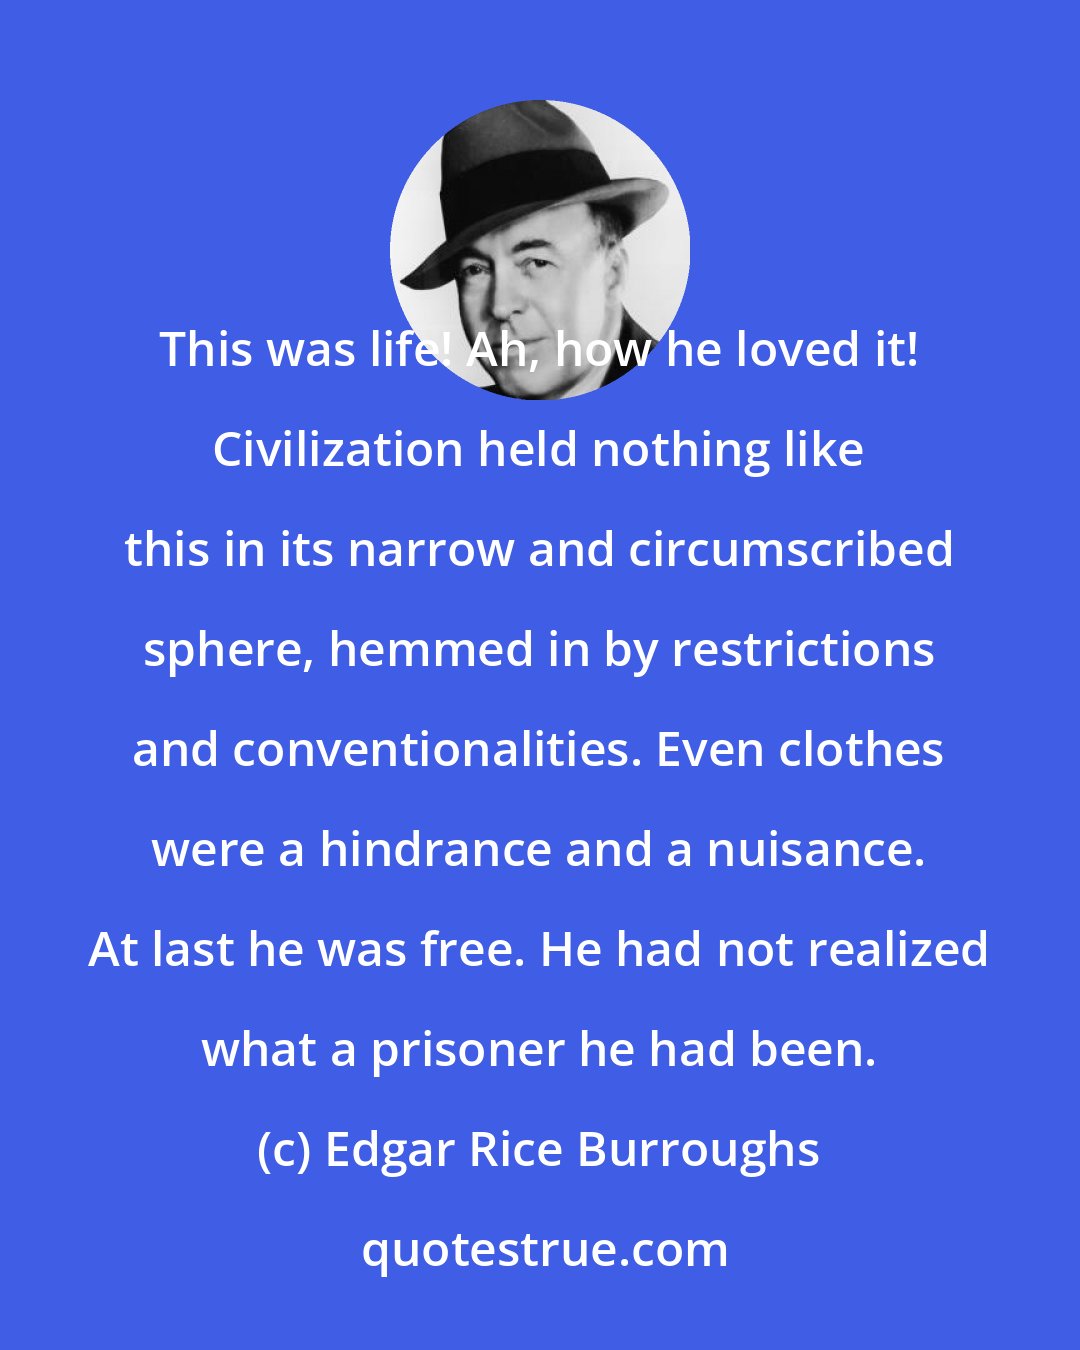 Edgar Rice Burroughs: This was life! Ah, how he loved it! Civilization held nothing like this in its narrow and circumscribed sphere, hemmed in by restrictions and conventionalities. Even clothes were a hindrance and a nuisance. At last he was free. He had not realized what a prisoner he had been.